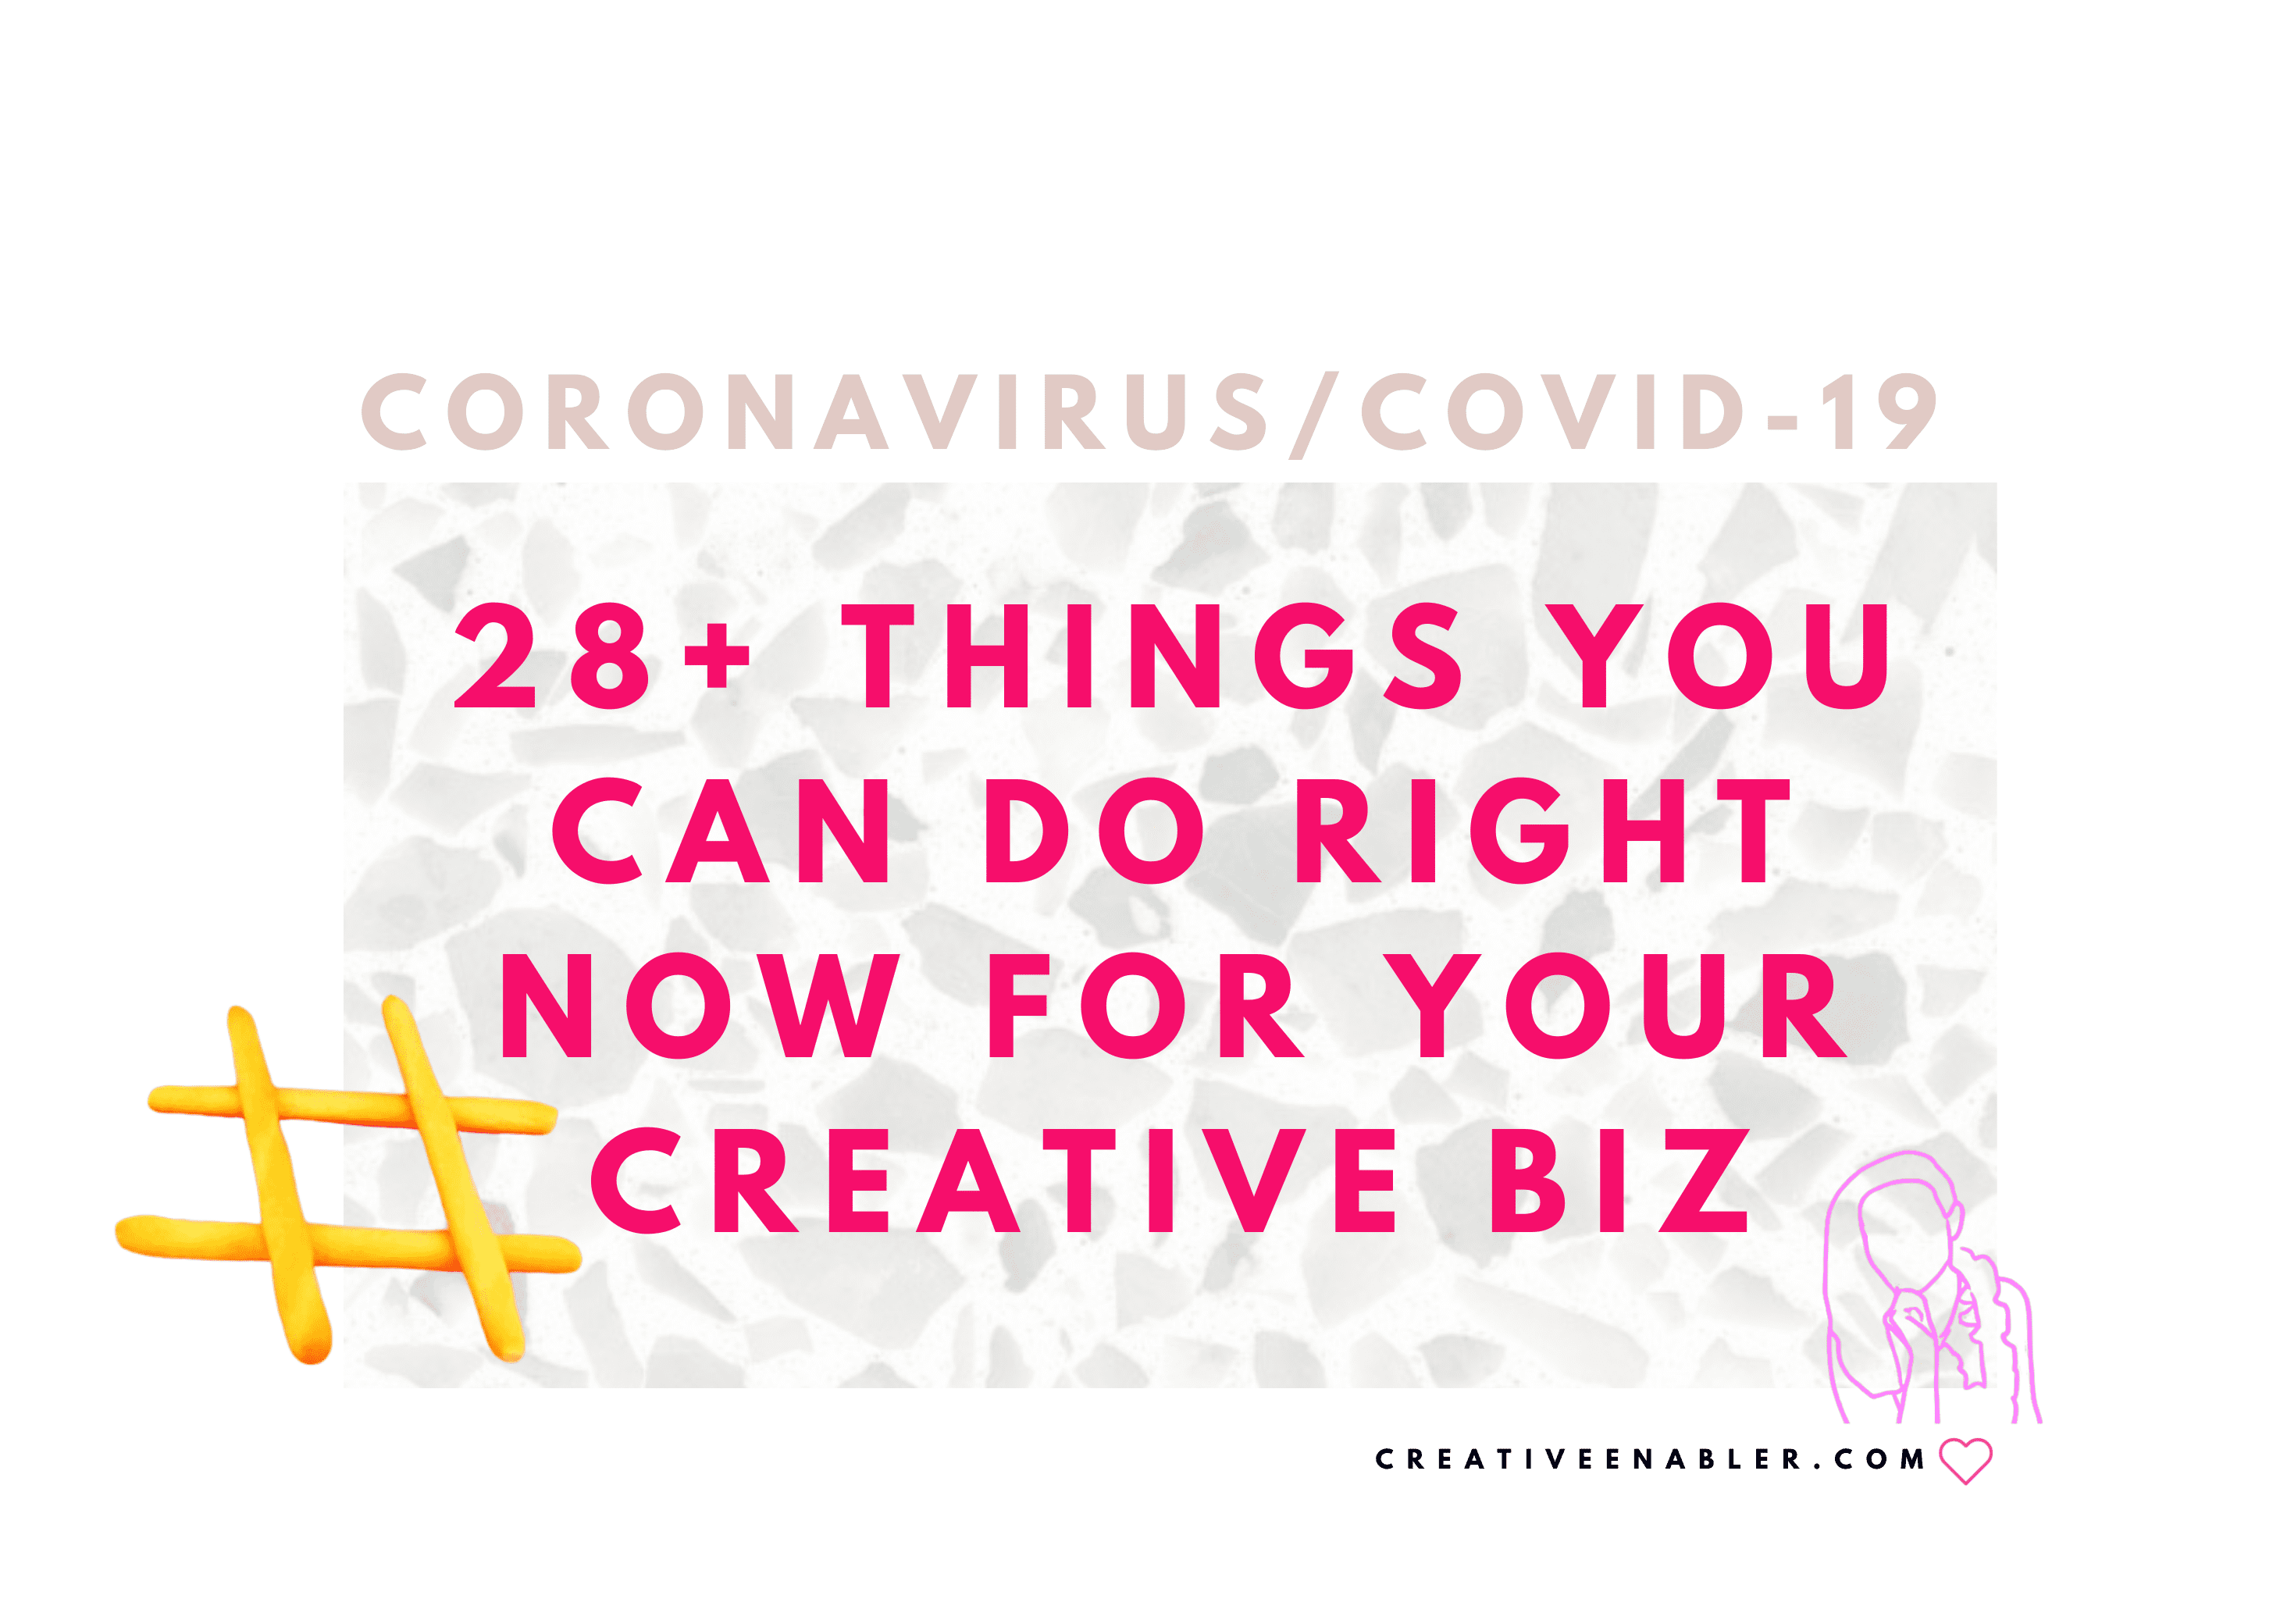 28 Things You Can Do For Your Creative Biz Right Now During The Coronavirus/COVID-19 Panic